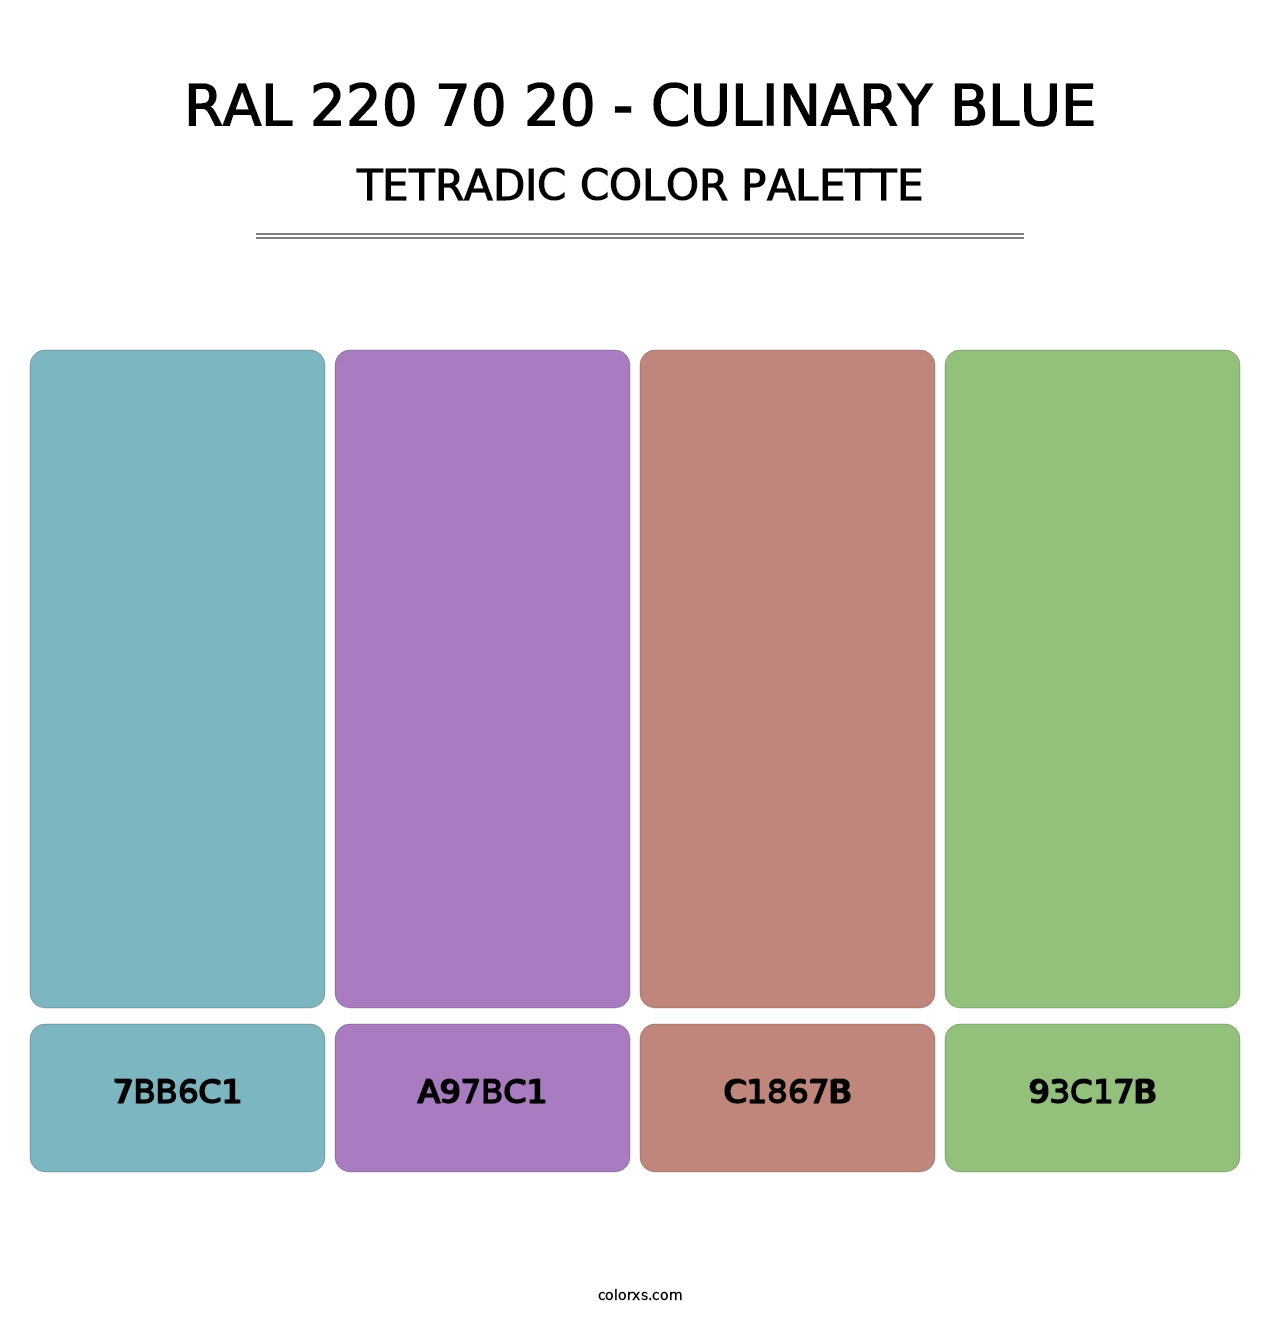 RAL 220 70 20 - Culinary Blue - Tetradic Color Palette